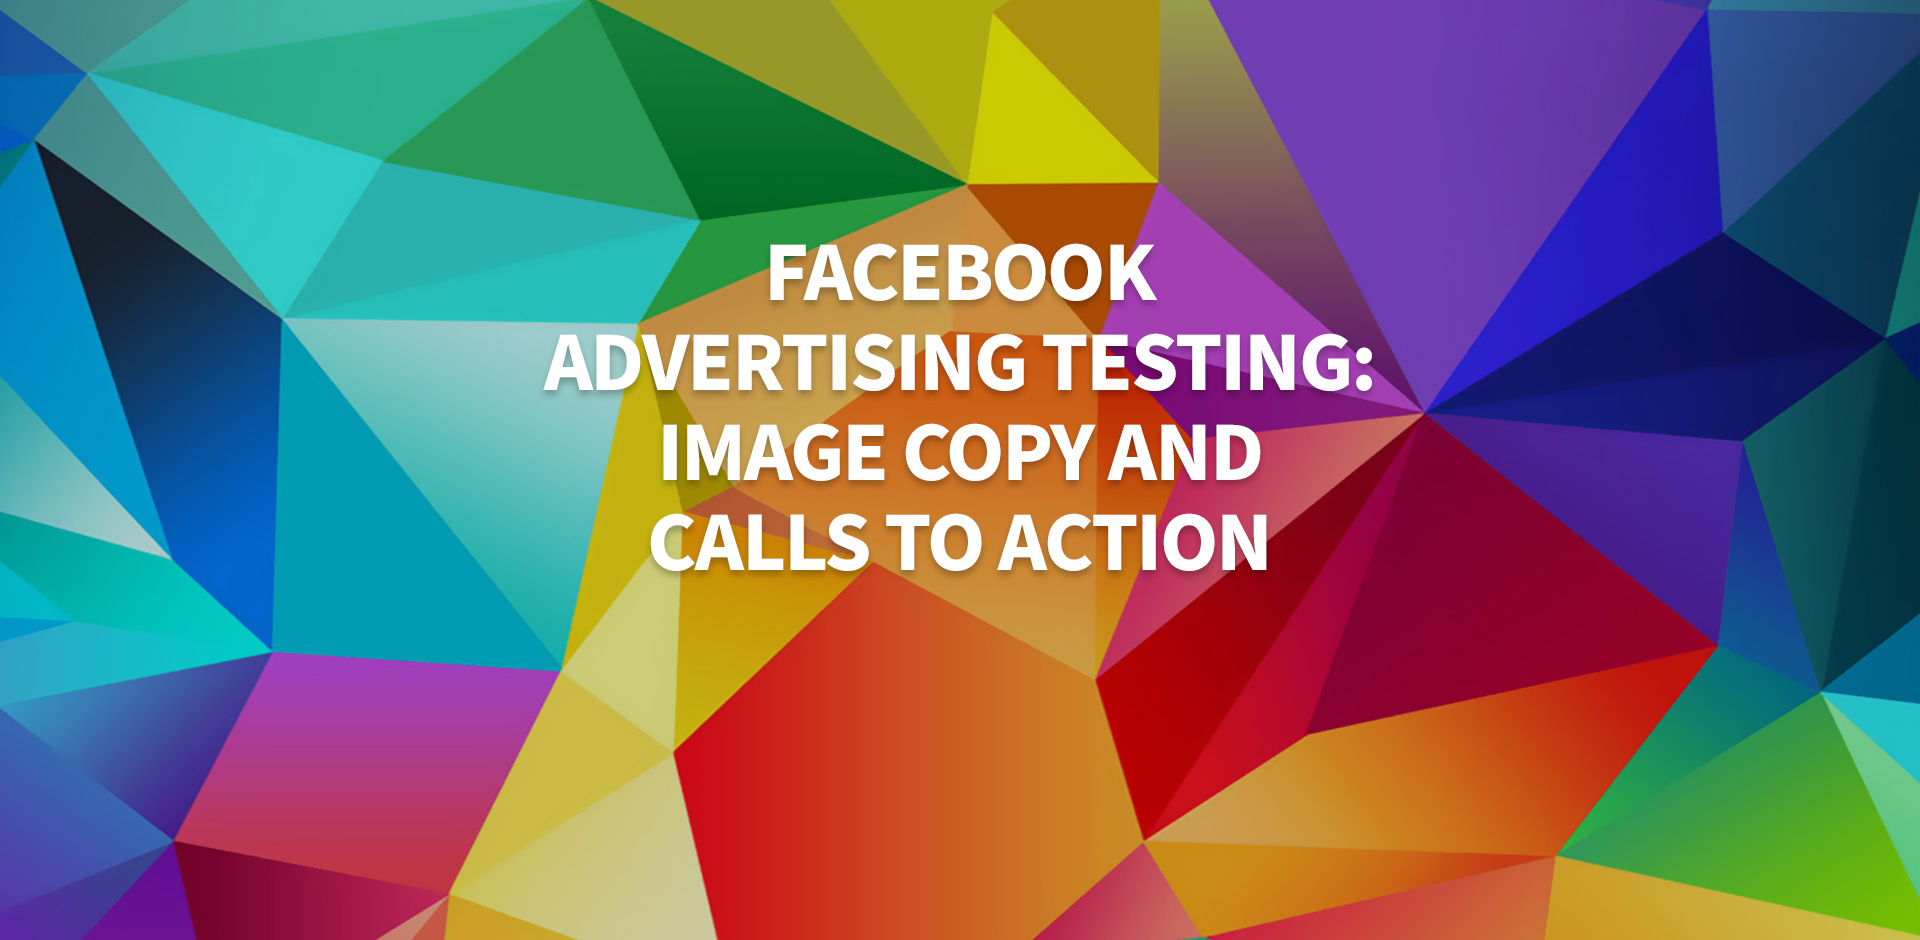 Facebook Advertising Testing: Image Copy and Calls to Action